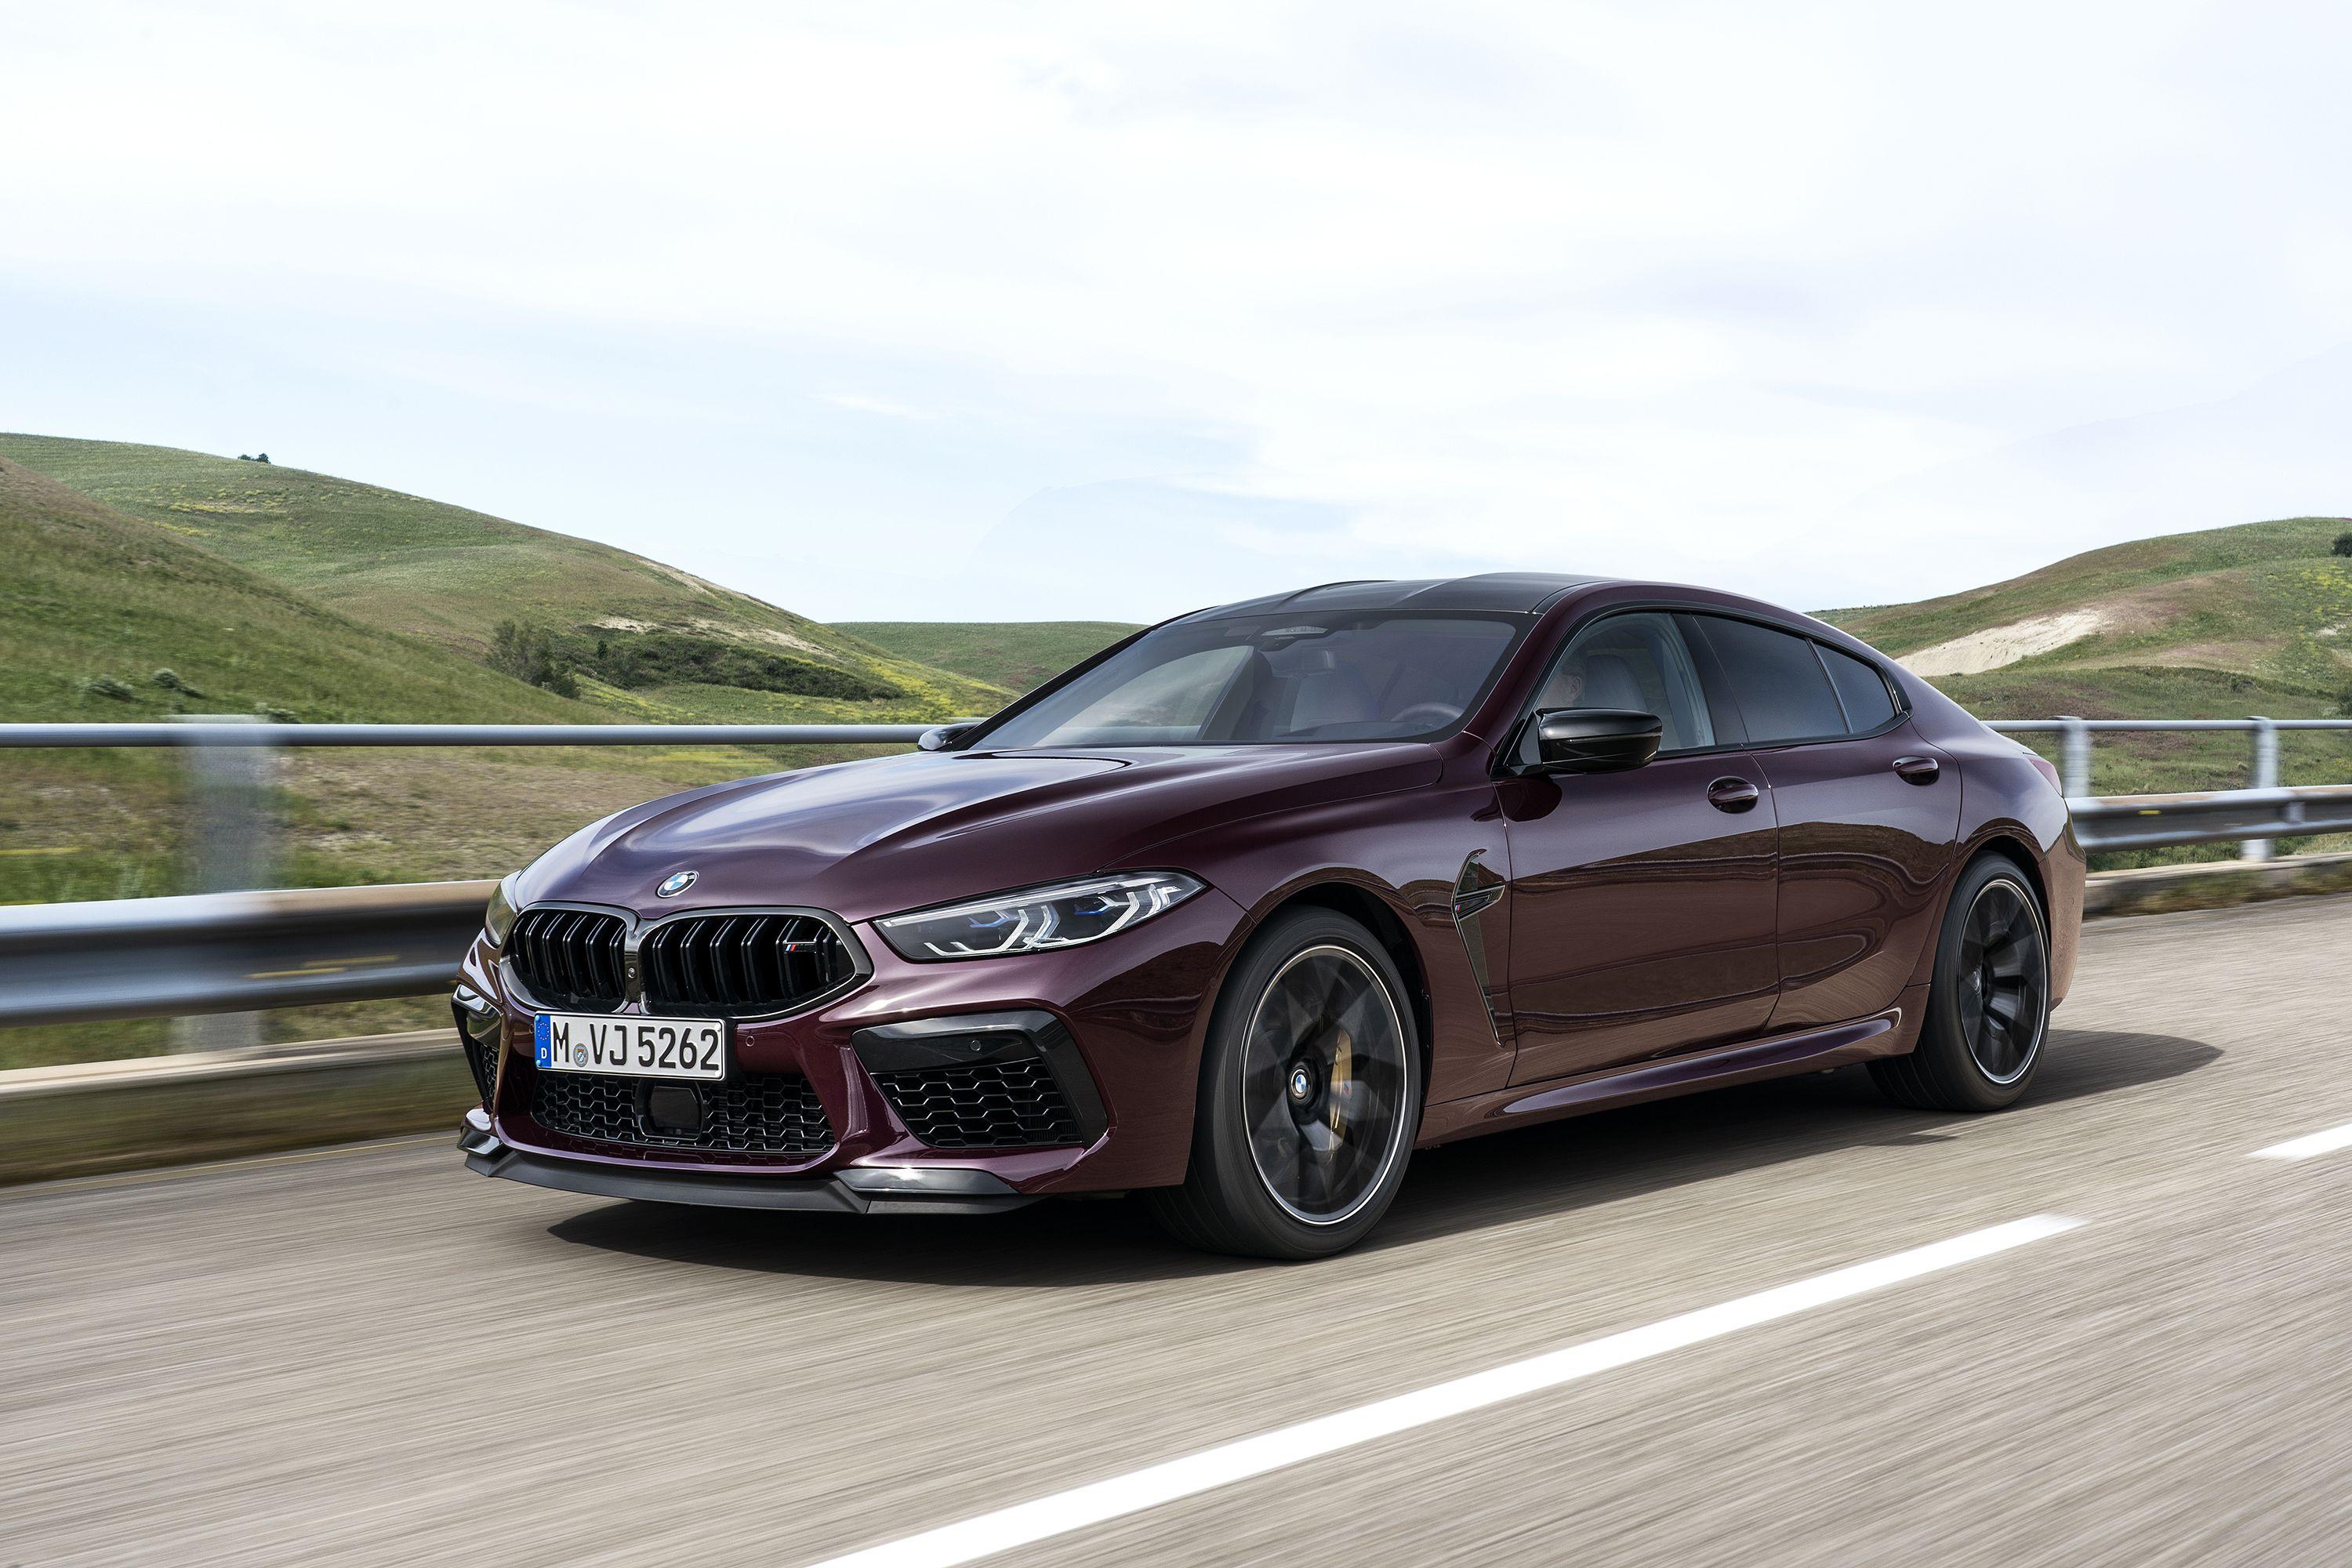 The 2020 BMW M8 Gran Coupe Debuts In a Splendid Shade of Purple